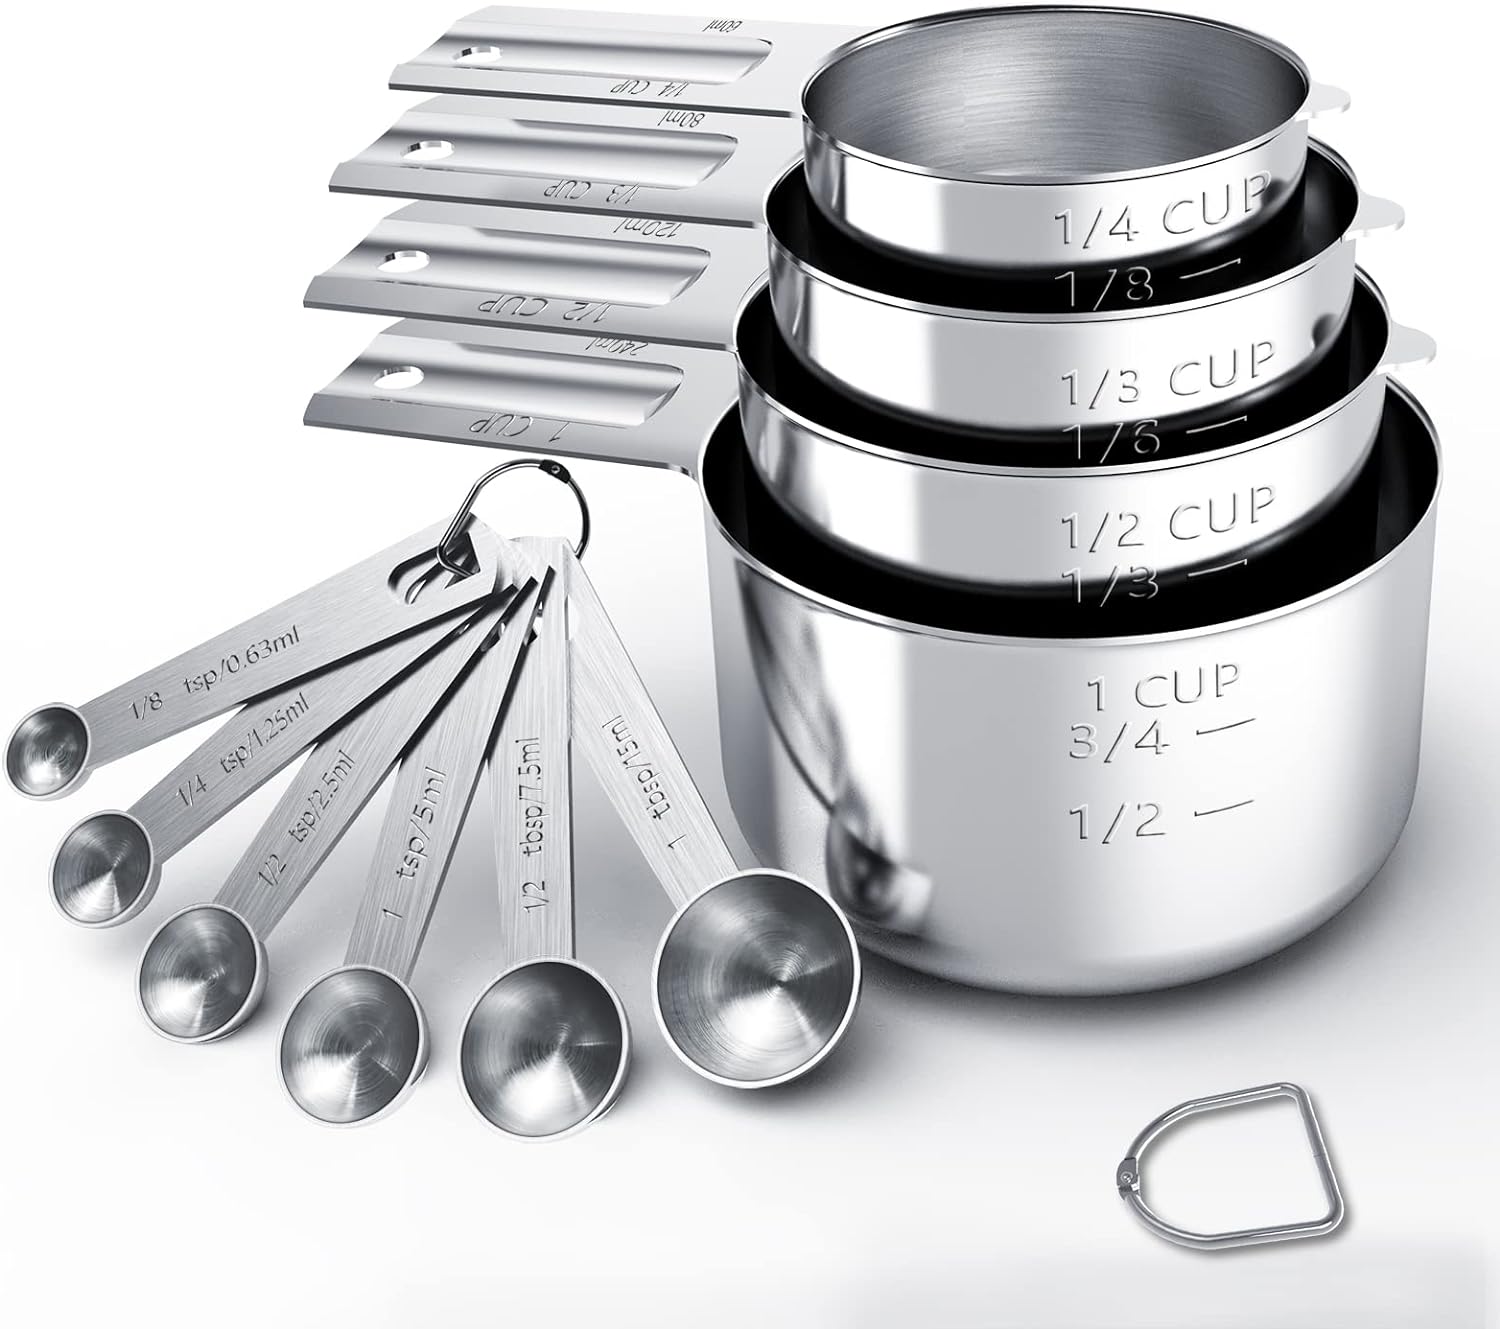 TILUCK Stainless Steel Measuring Cups & Spoons Set, Cups and Spoons,Kitchen Gadgets for Cooking & Baking (Medium)